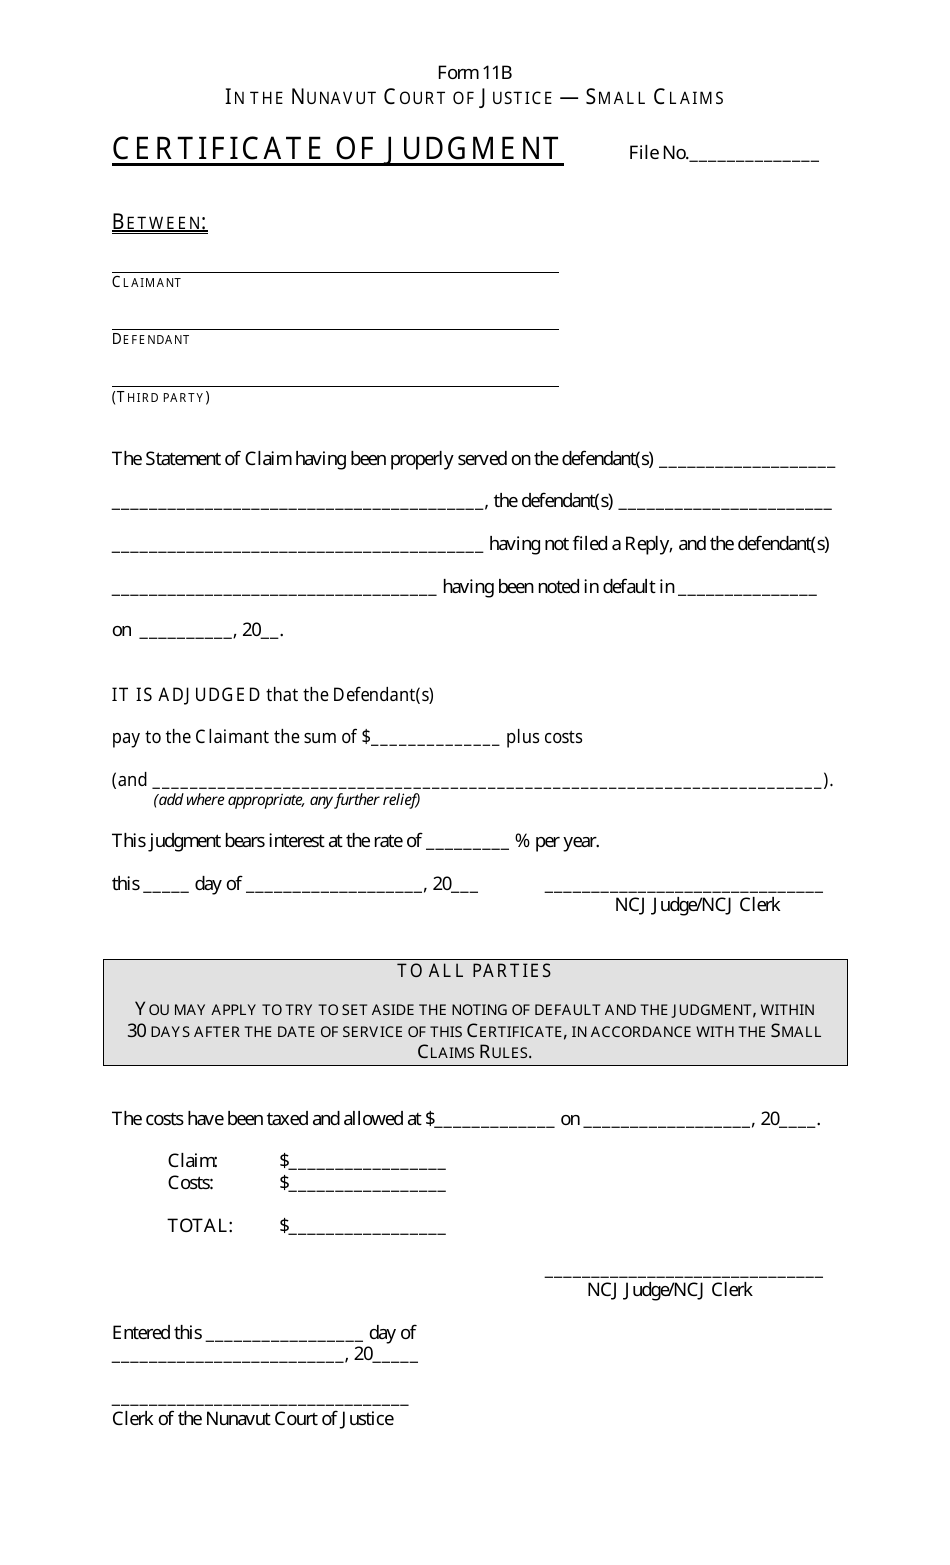 Form 11B Certificate of Judgment - Nunavut, Canada, Page 1